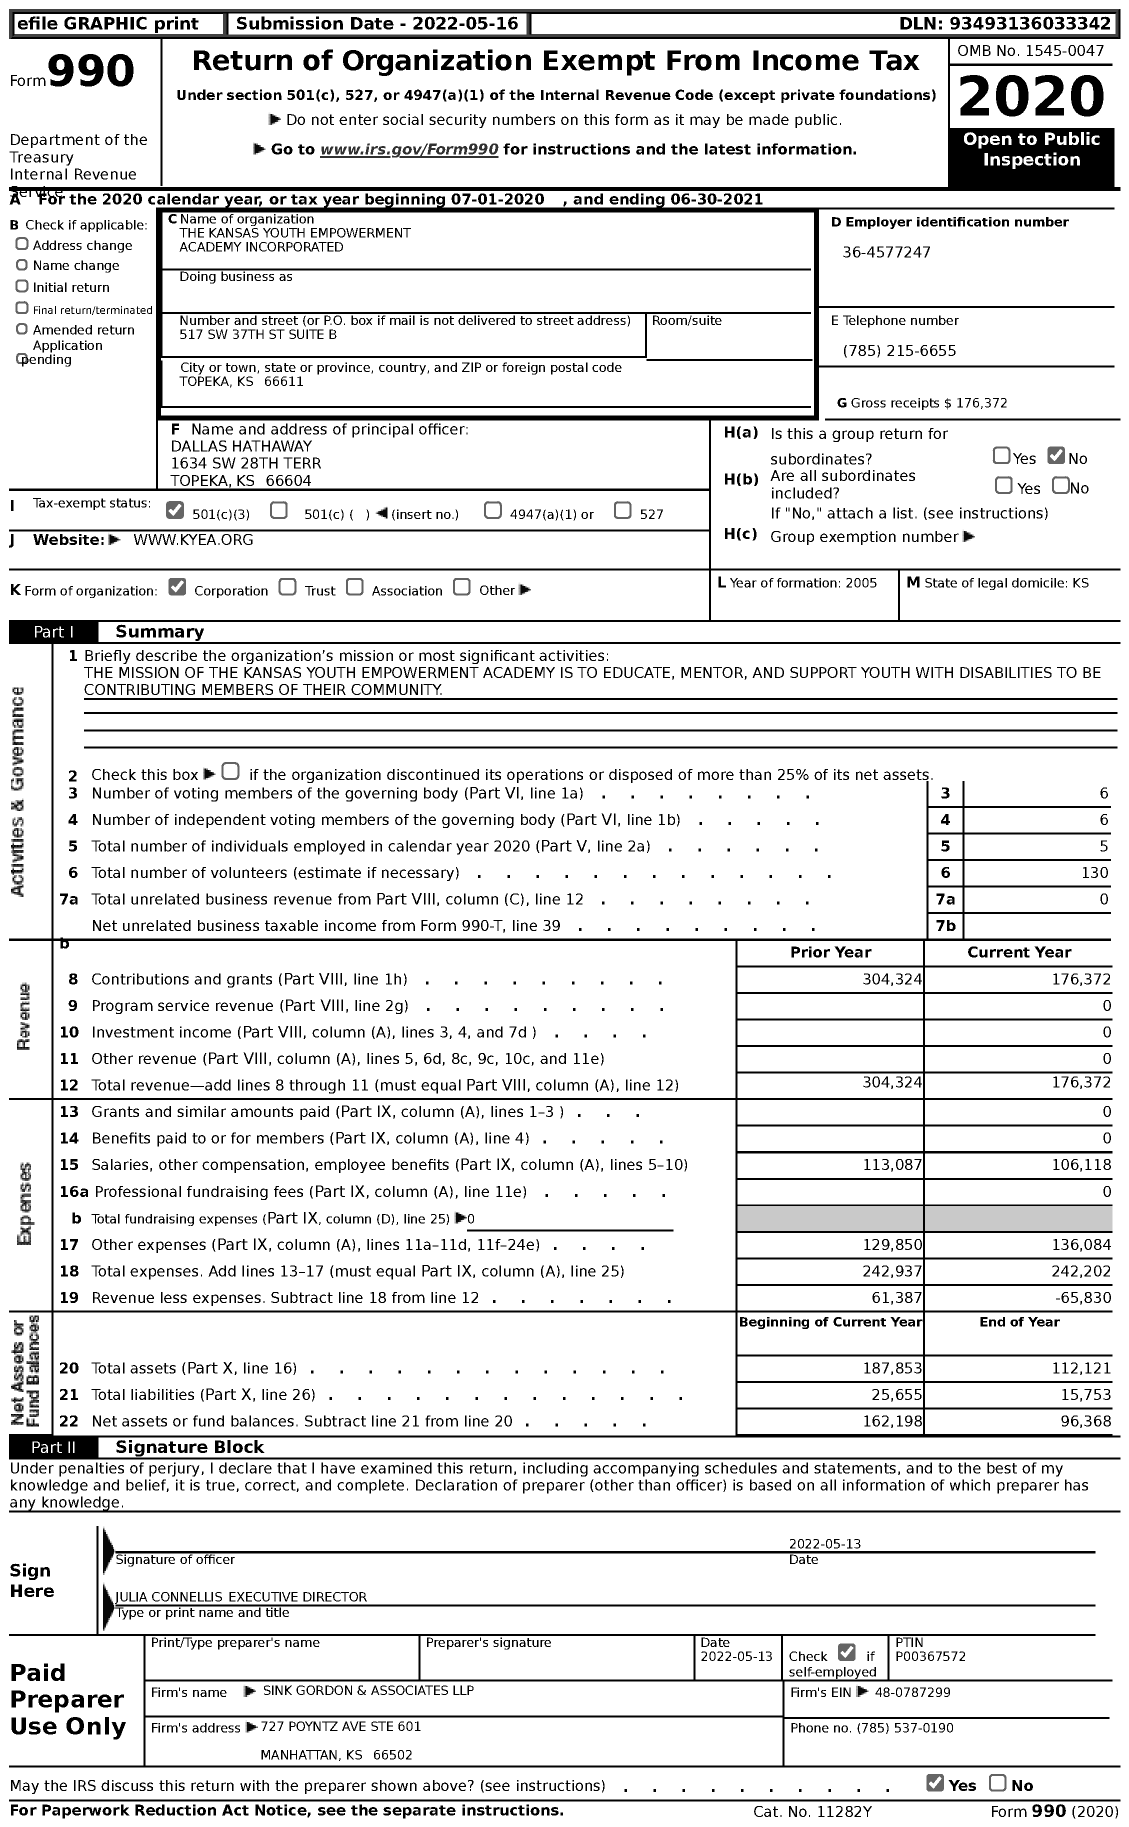 Image of first page of 2020 Form 990 for The Kansas Youth Empowerment Academy Incorporated